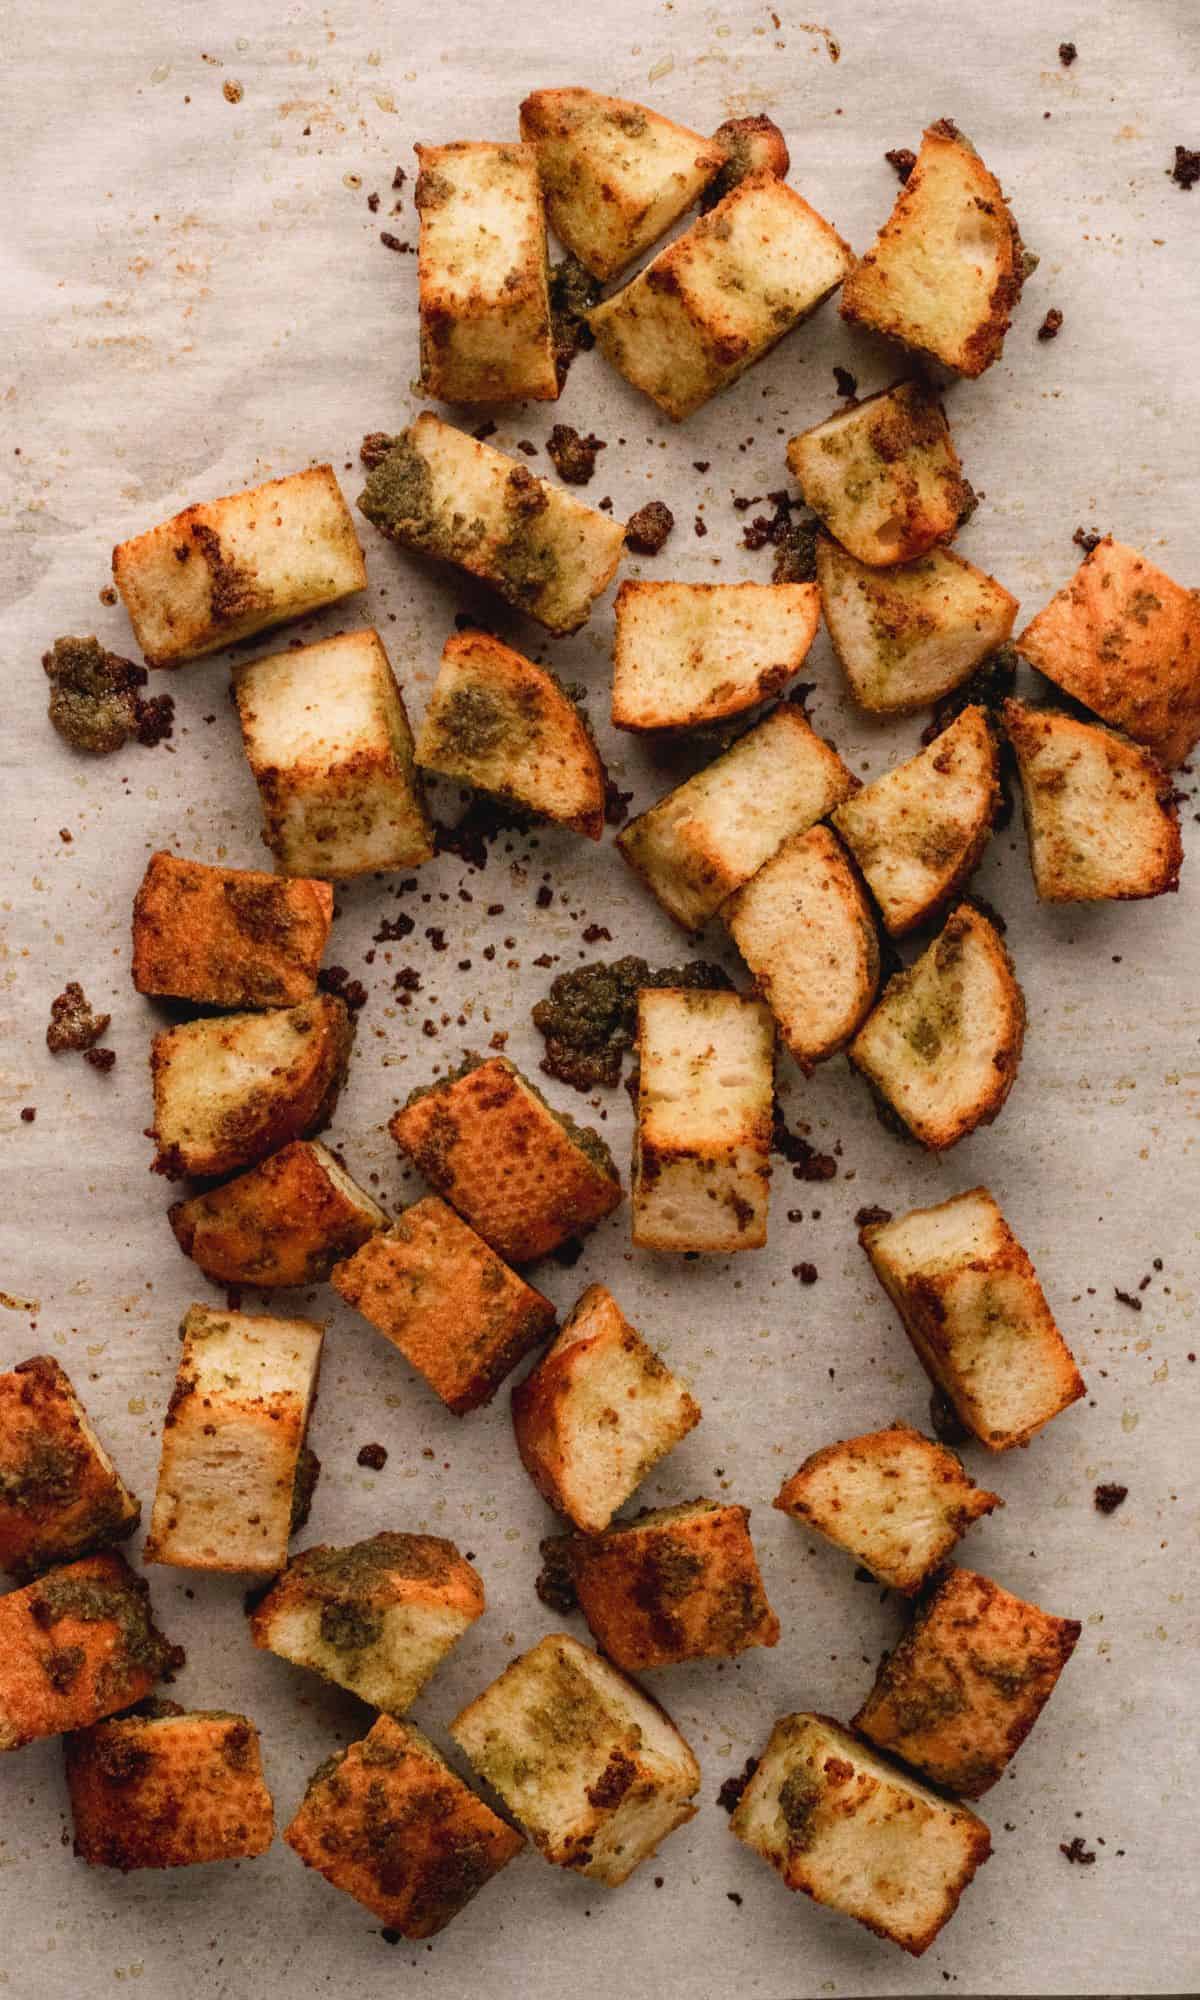 Toasted pesto croutons on a baking sheet.